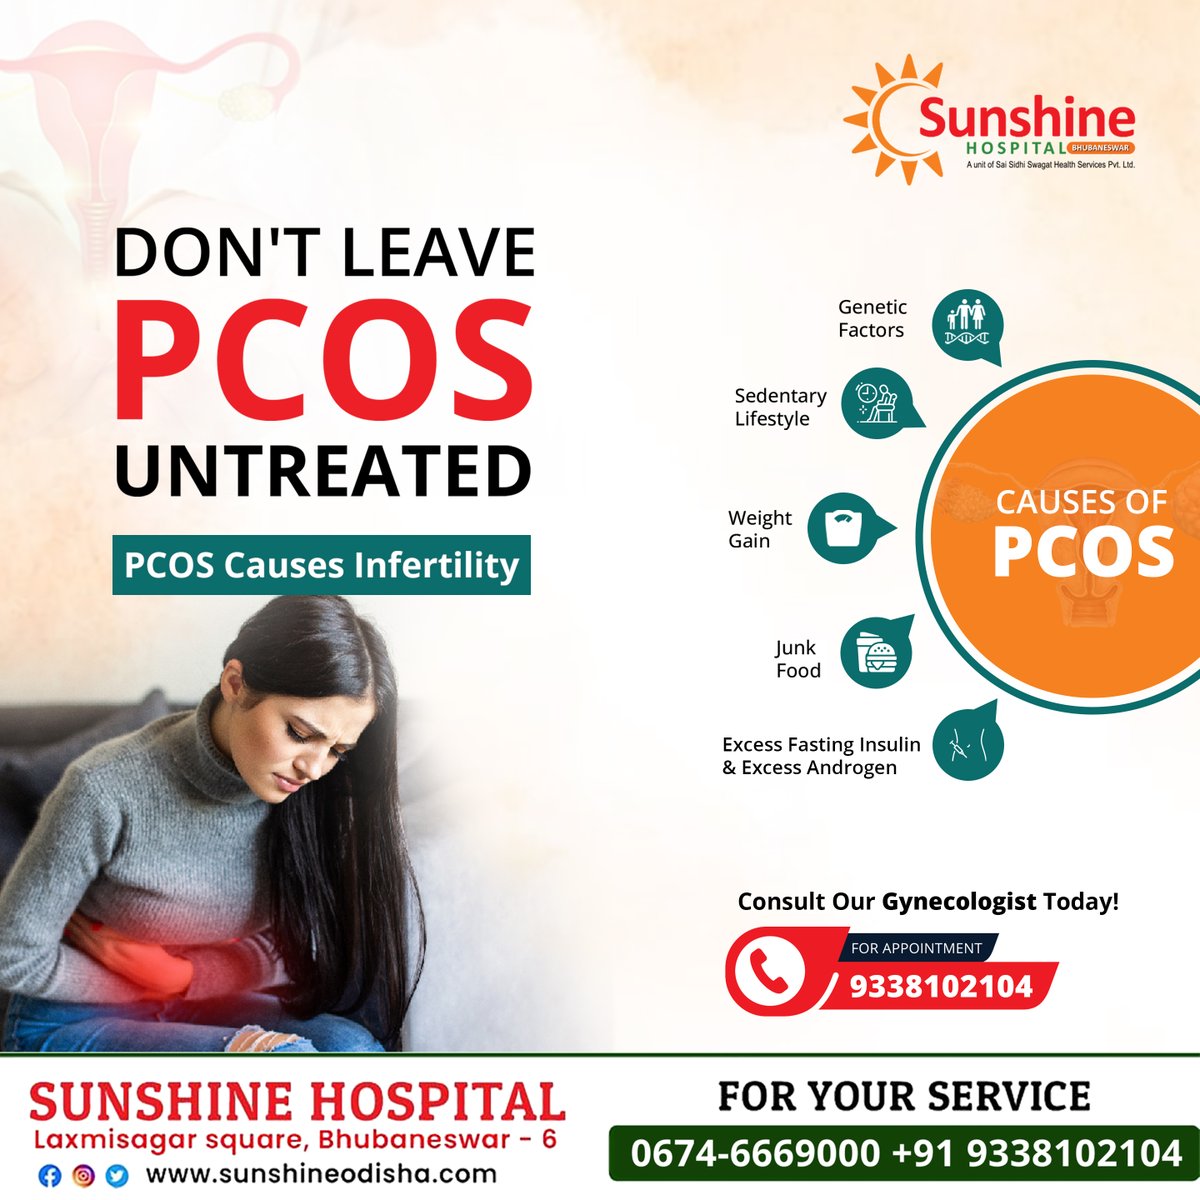 Your well-being matters. Take the first step towards managing PCOS by consulting with our skilled gynecologists at @SunshineBBSR.

For Appointment, Contact: 9338102104

#sunshinehospital #CenterOfExcellence #PCOSAwareness #PCOSsupport #GynecologyCare #gynecologist #WomenHealth